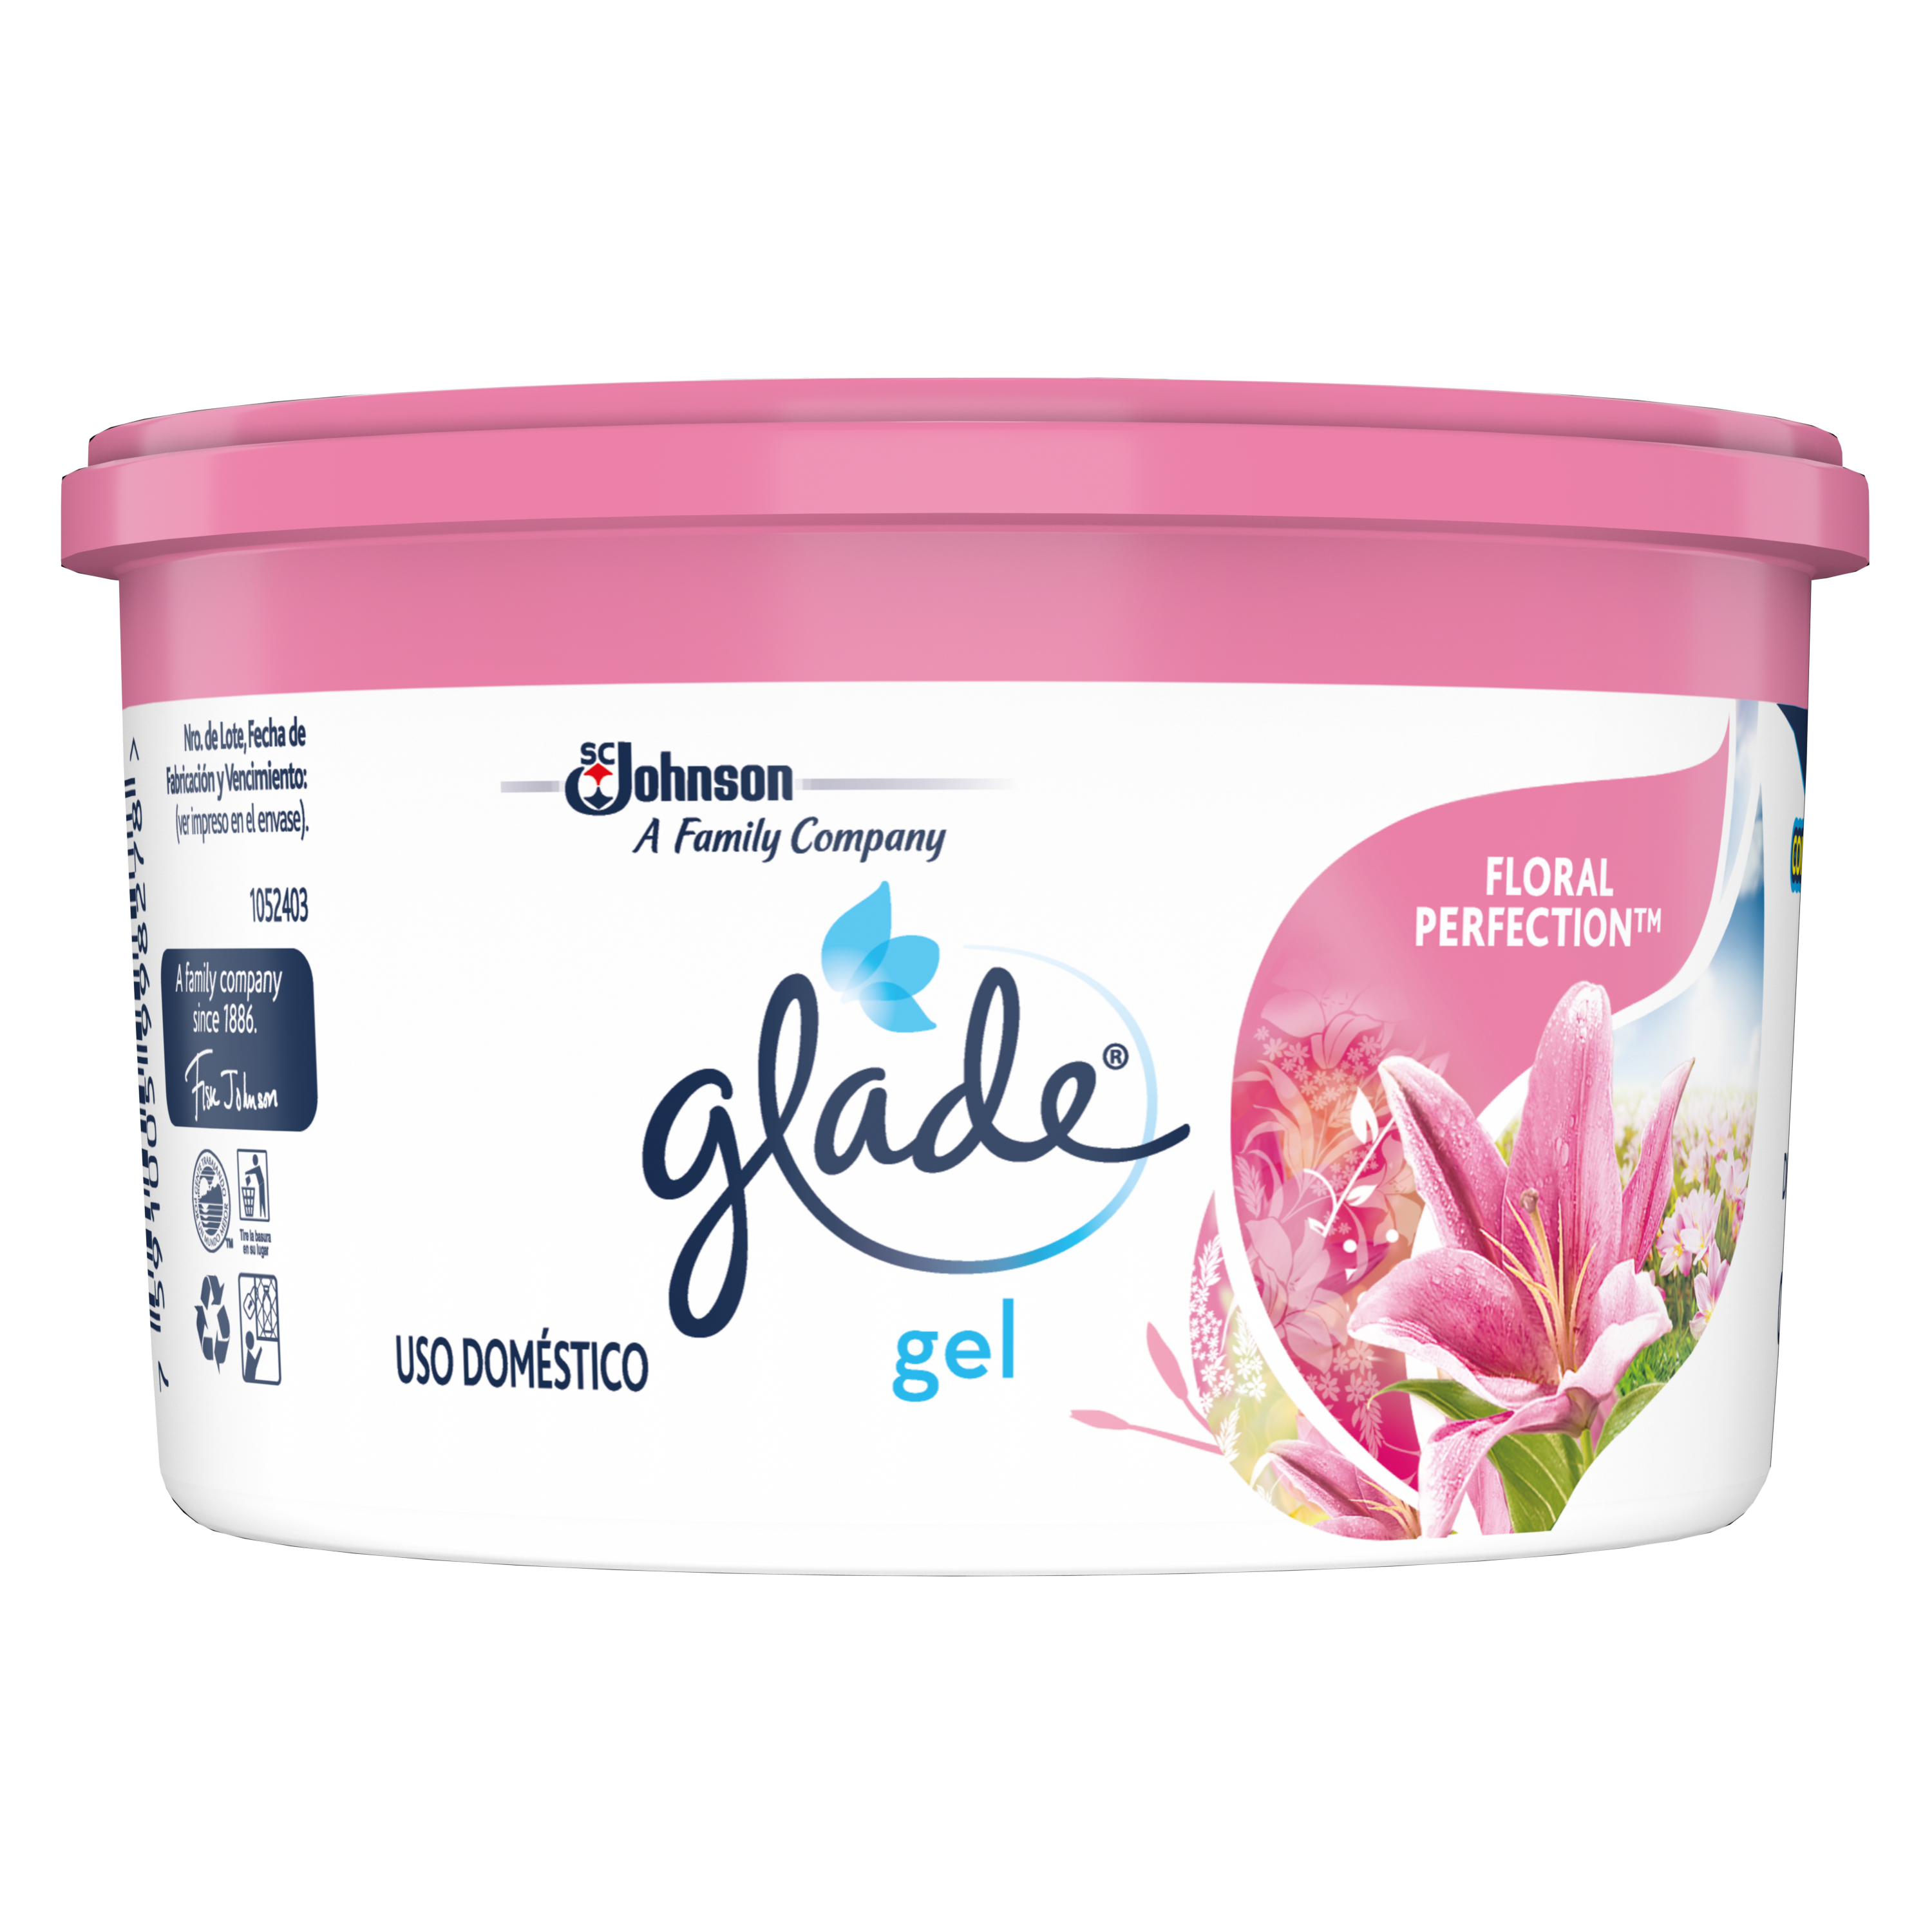 Glade® Gel Floral Perfection